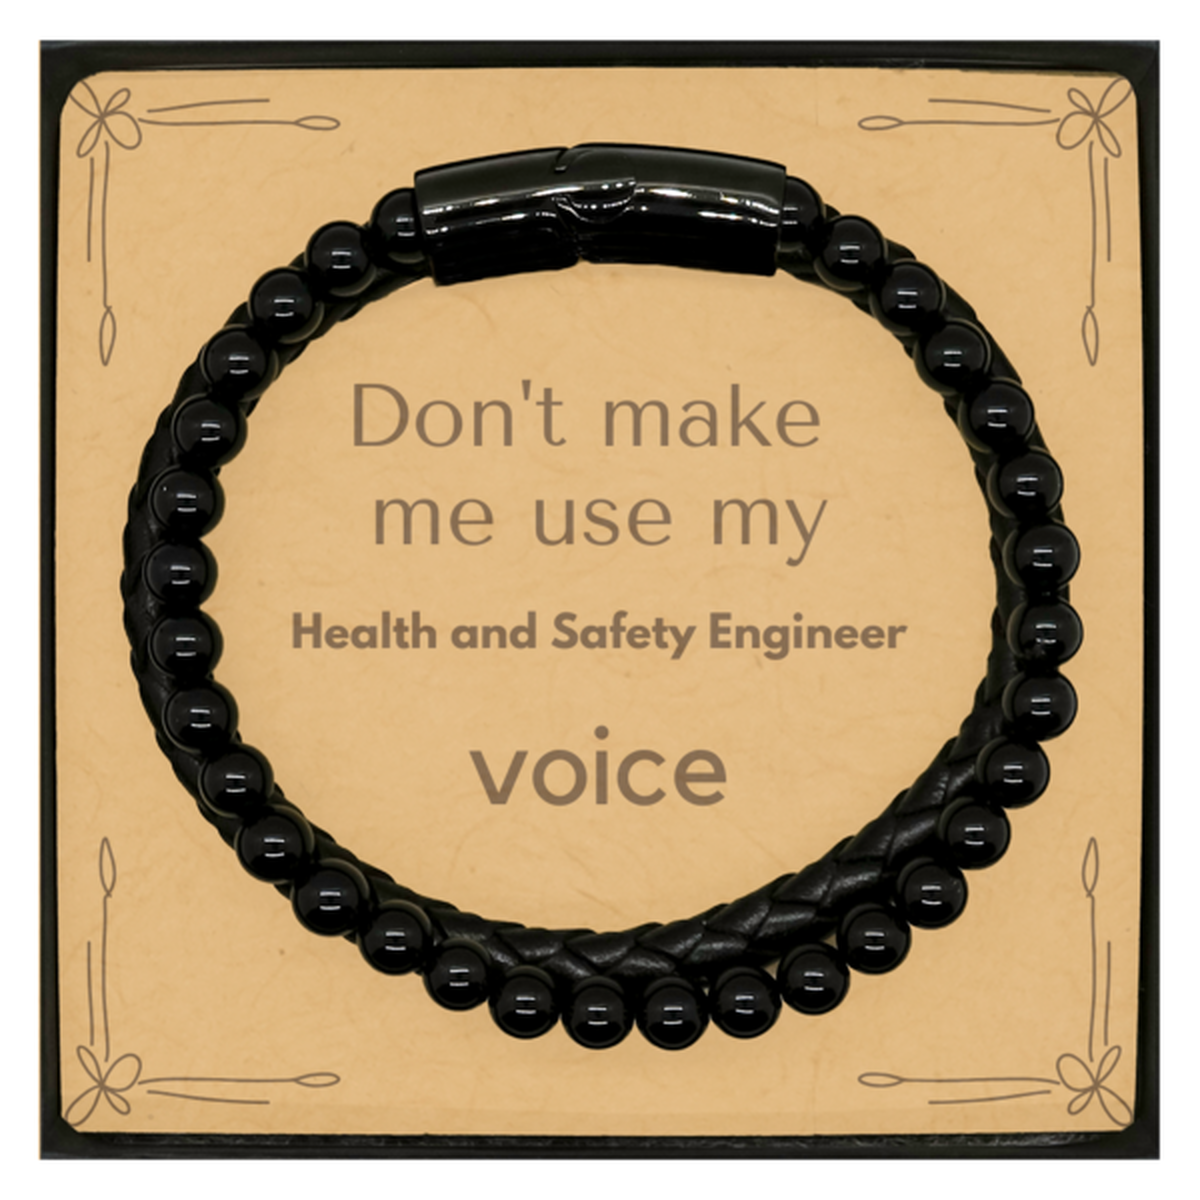 Don't make me use my Health and Safety Engineer voice, Sarcasm Health and Safety Engineer Card Gifts, Christmas Health and Safety Engineer Stone Leather Bracelets Birthday Unique Gifts For Health and Safety Engineer Coworkers, Men, Women, Colleague, Frien